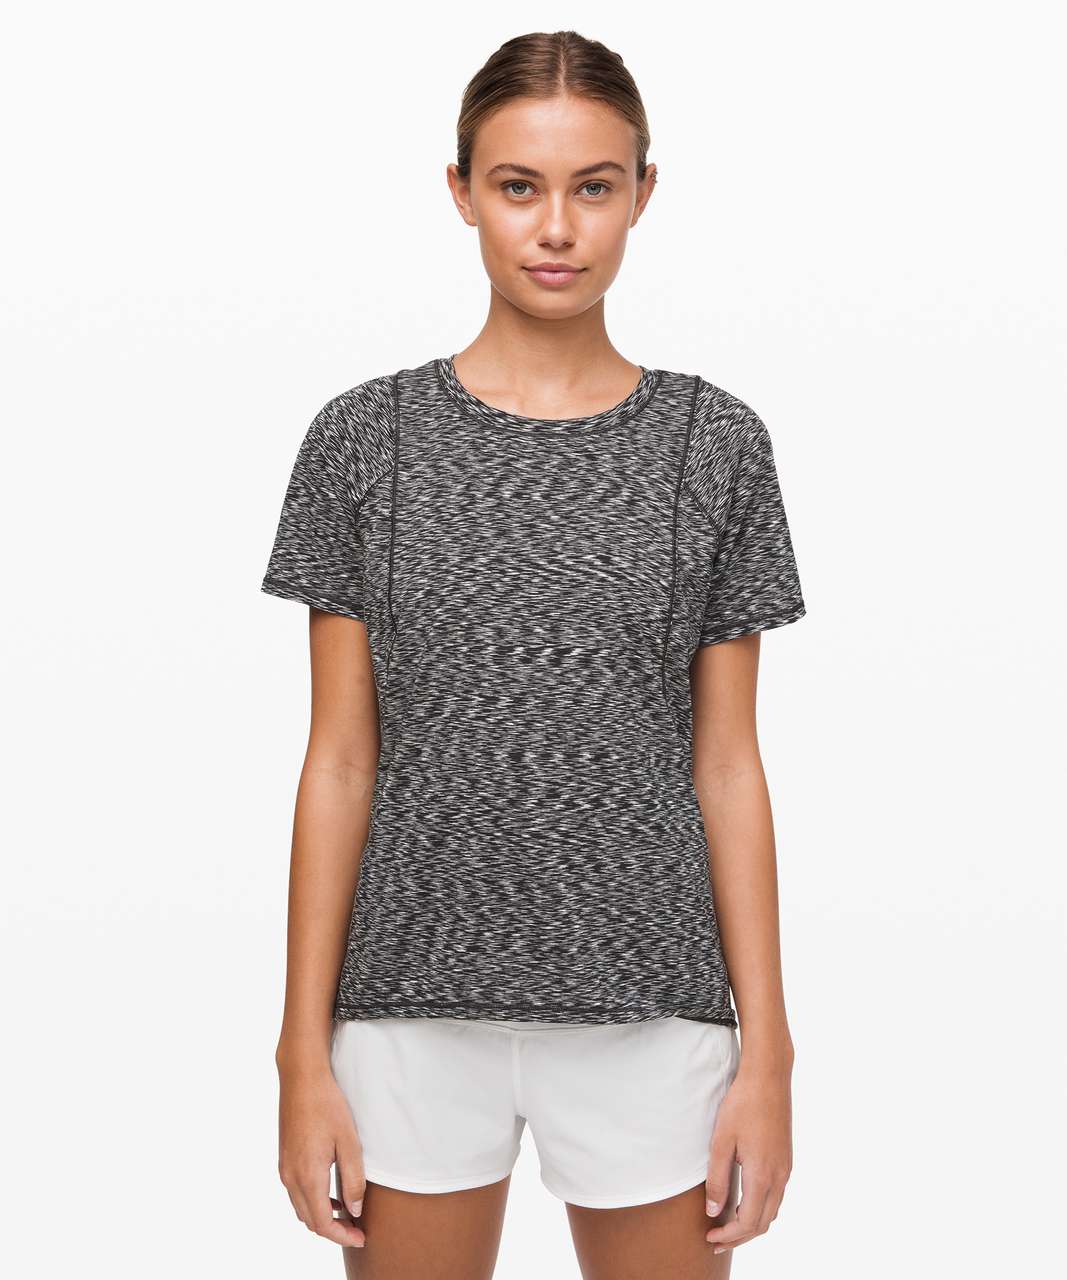 Lululemon Make Miles Count Short Sleeve - Spaced Out Space Dye Black White